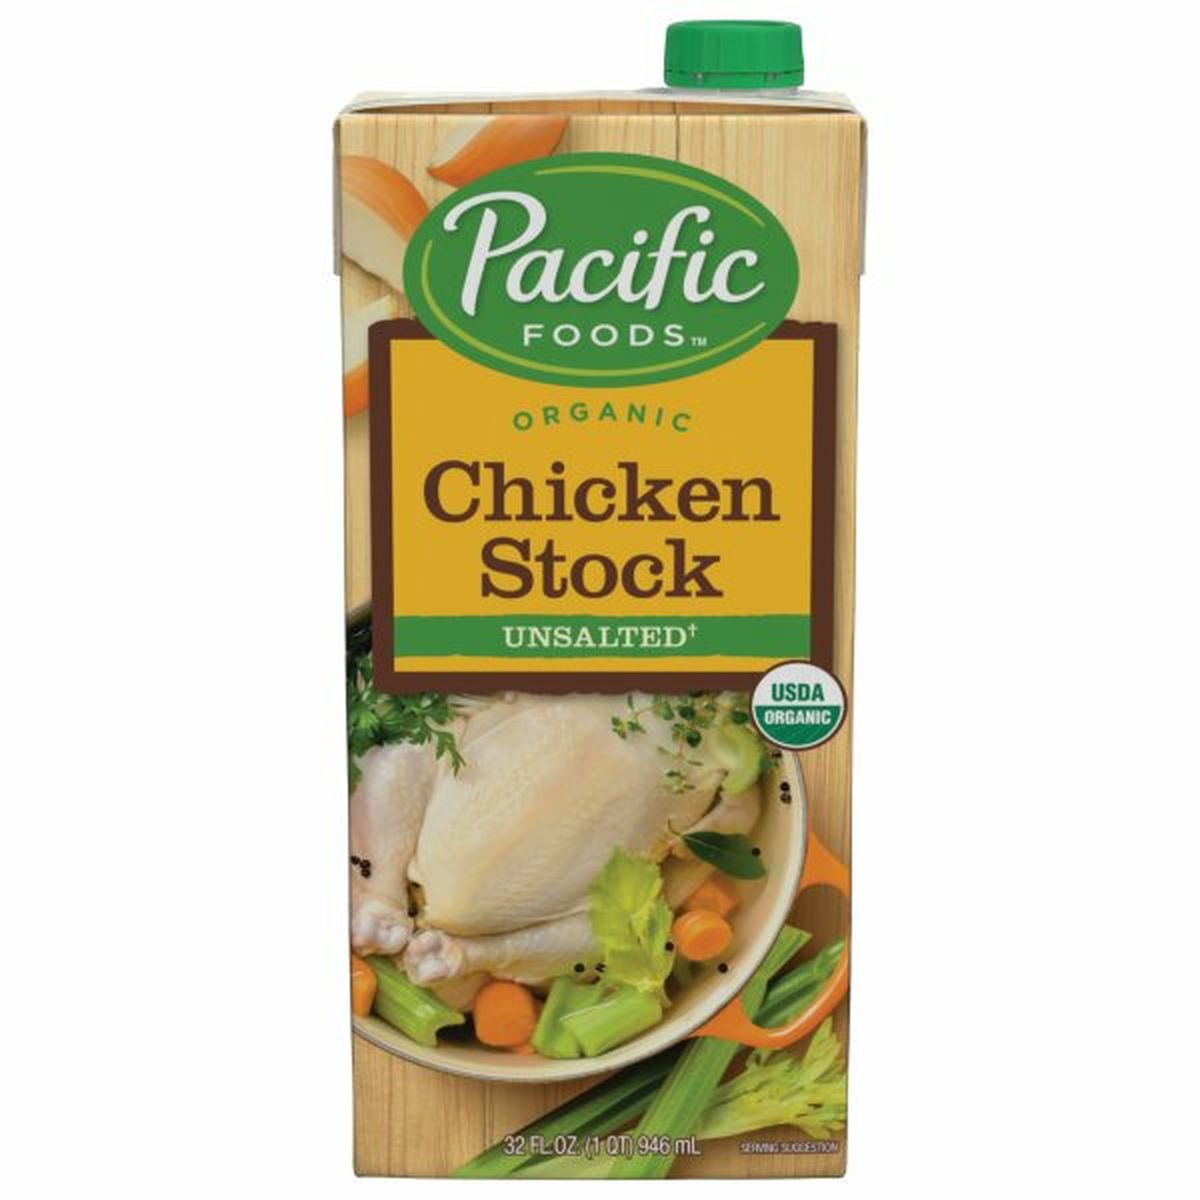 Calories in Pacific Stock, Organic, Chicken, Unsalted